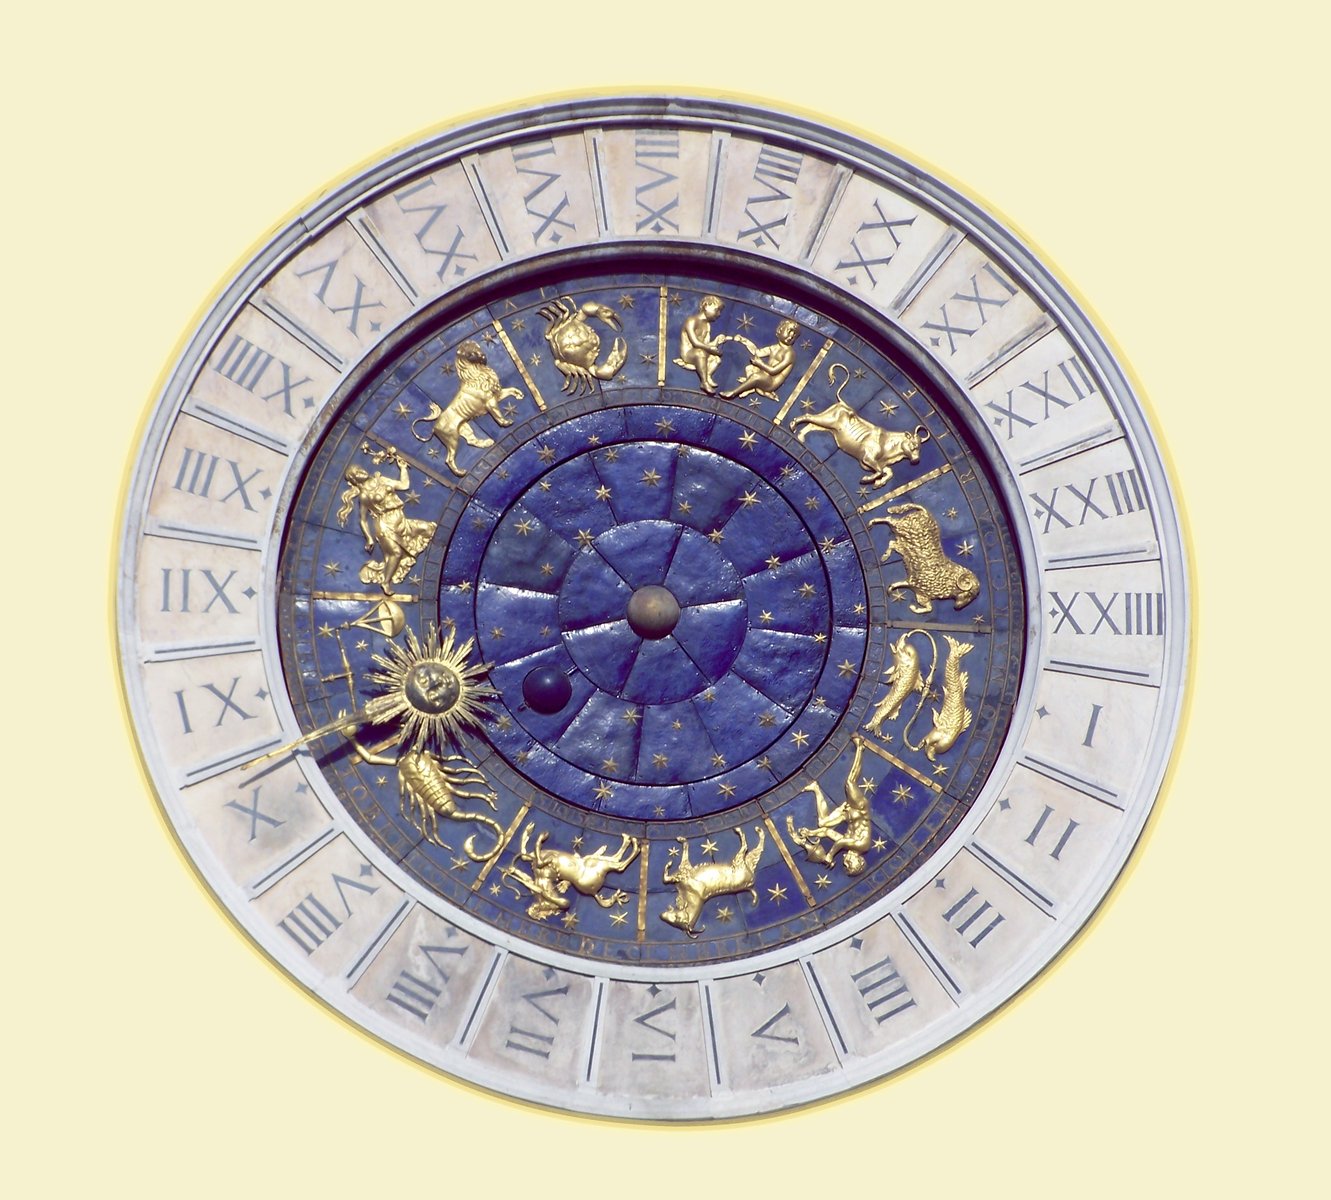 this is a clock with some zodiac signs on it